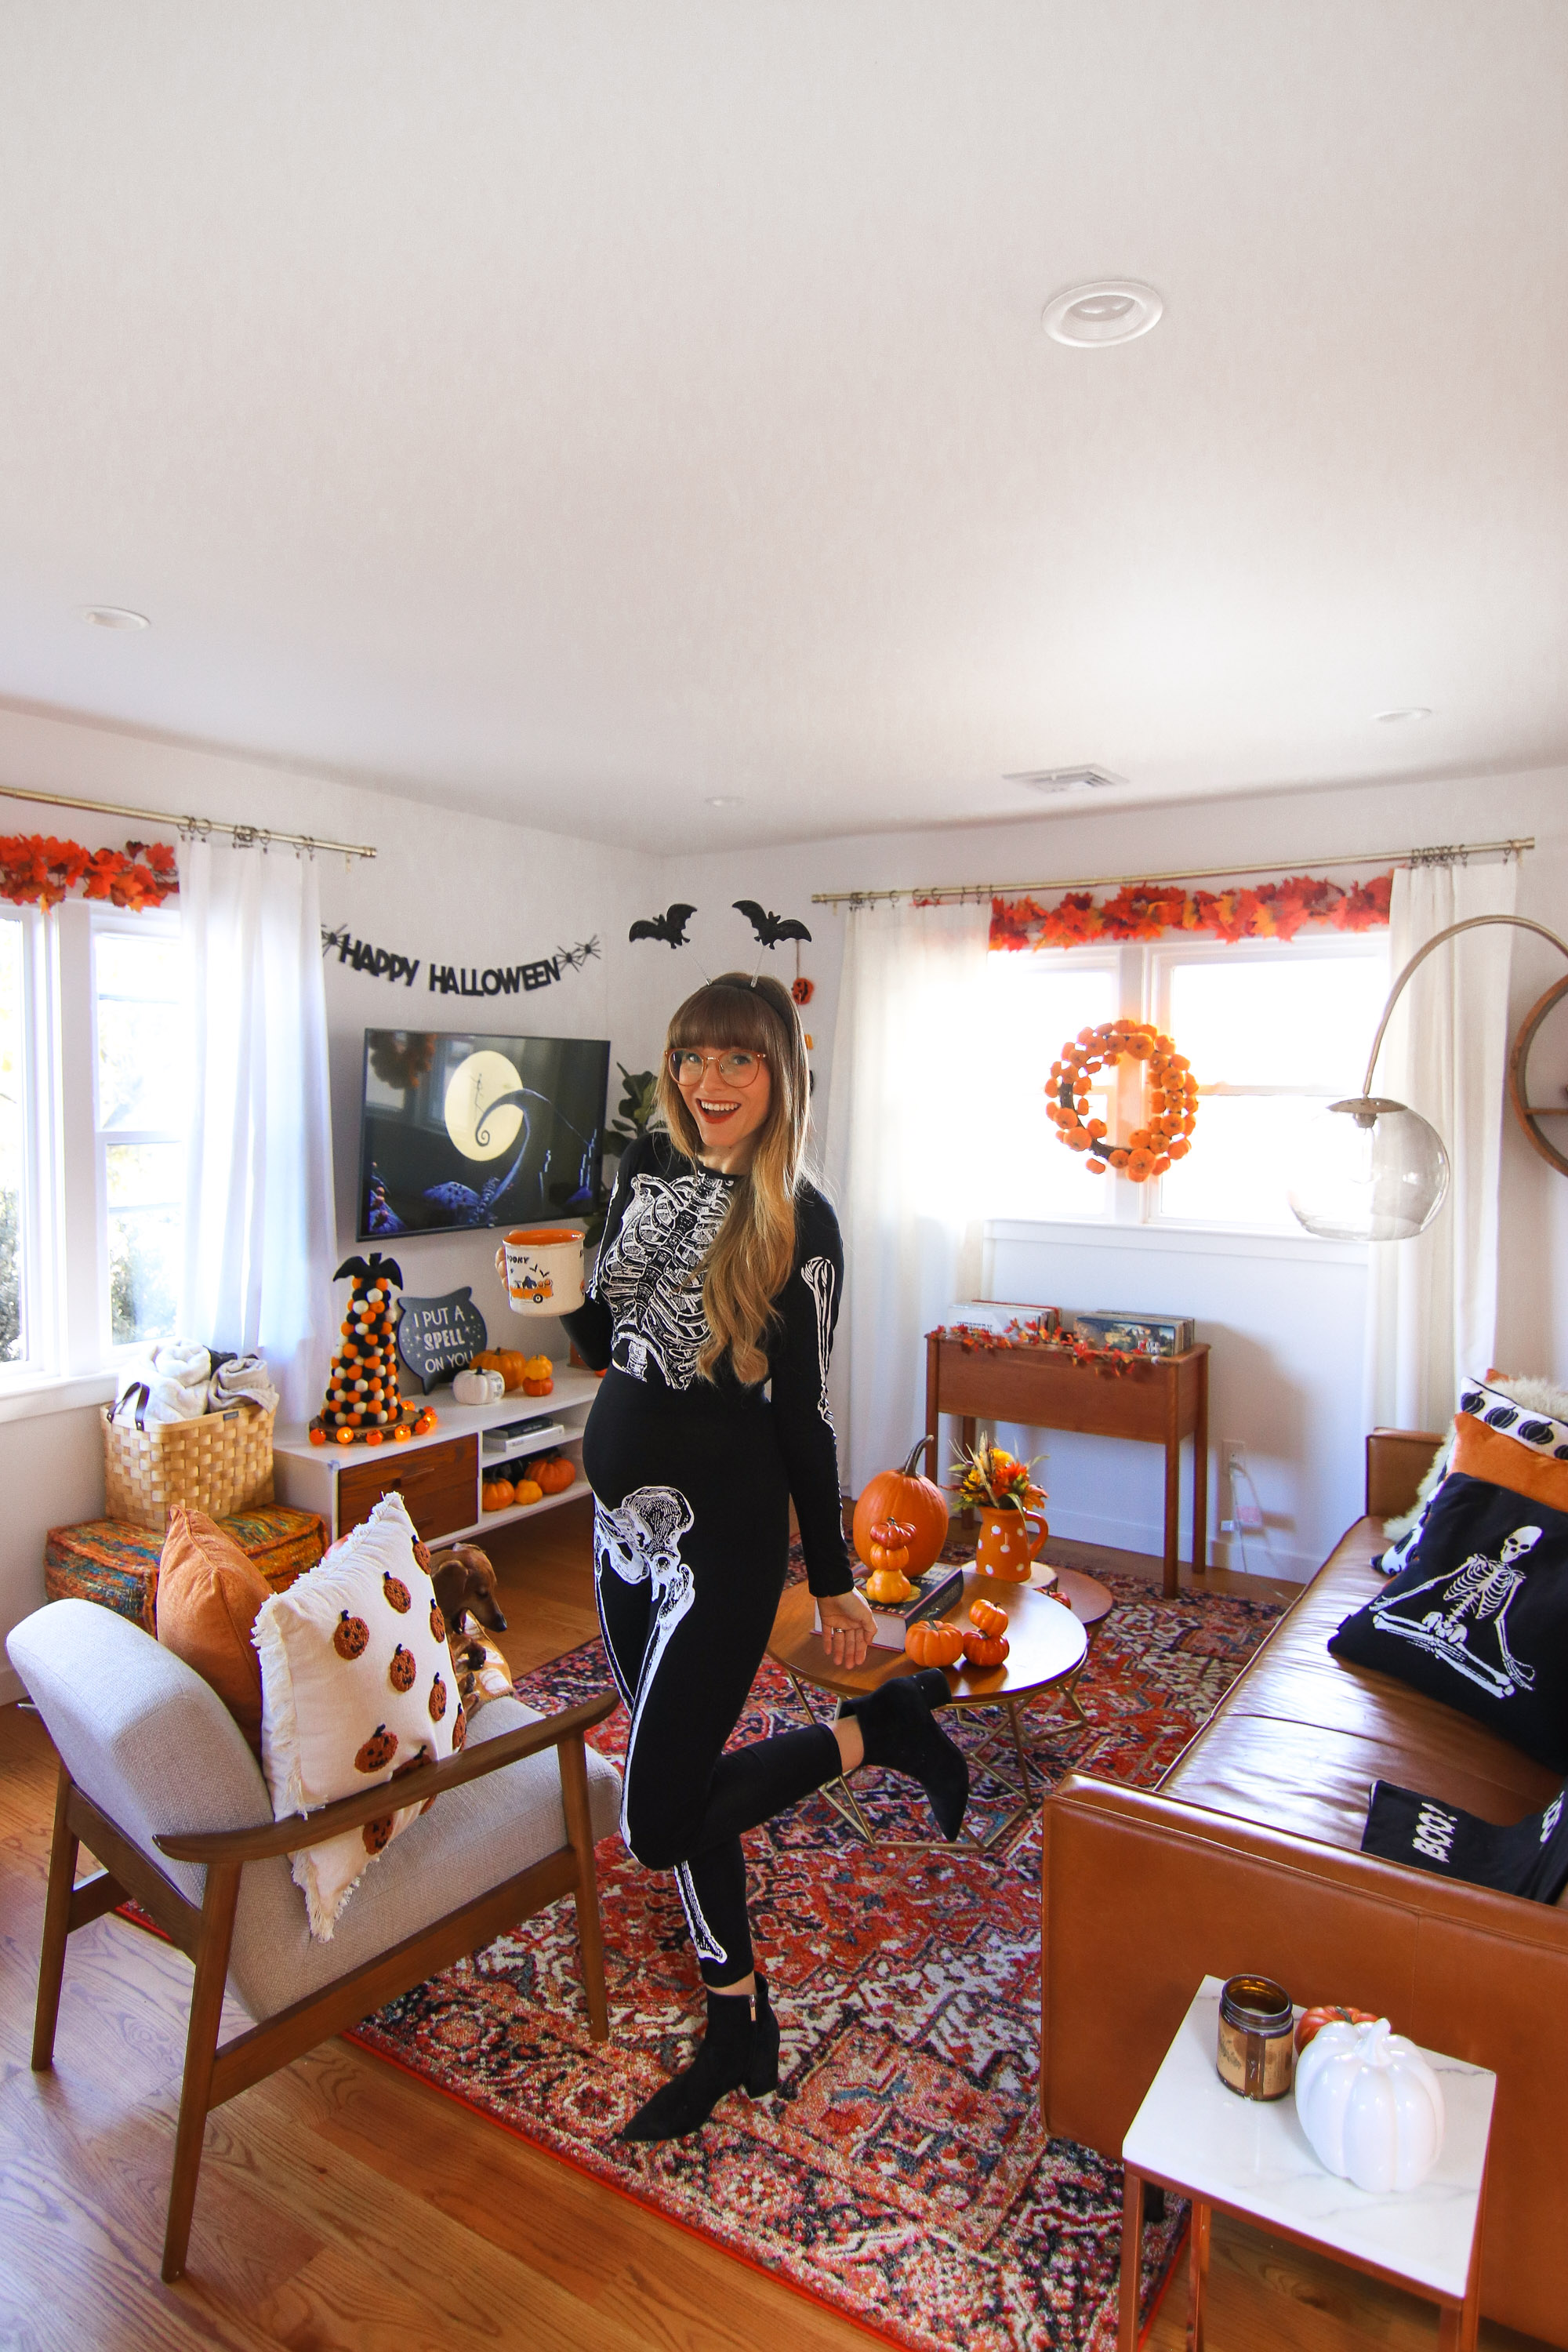 10 DIY Ideas to Make Your Halloween Decorations Room Special